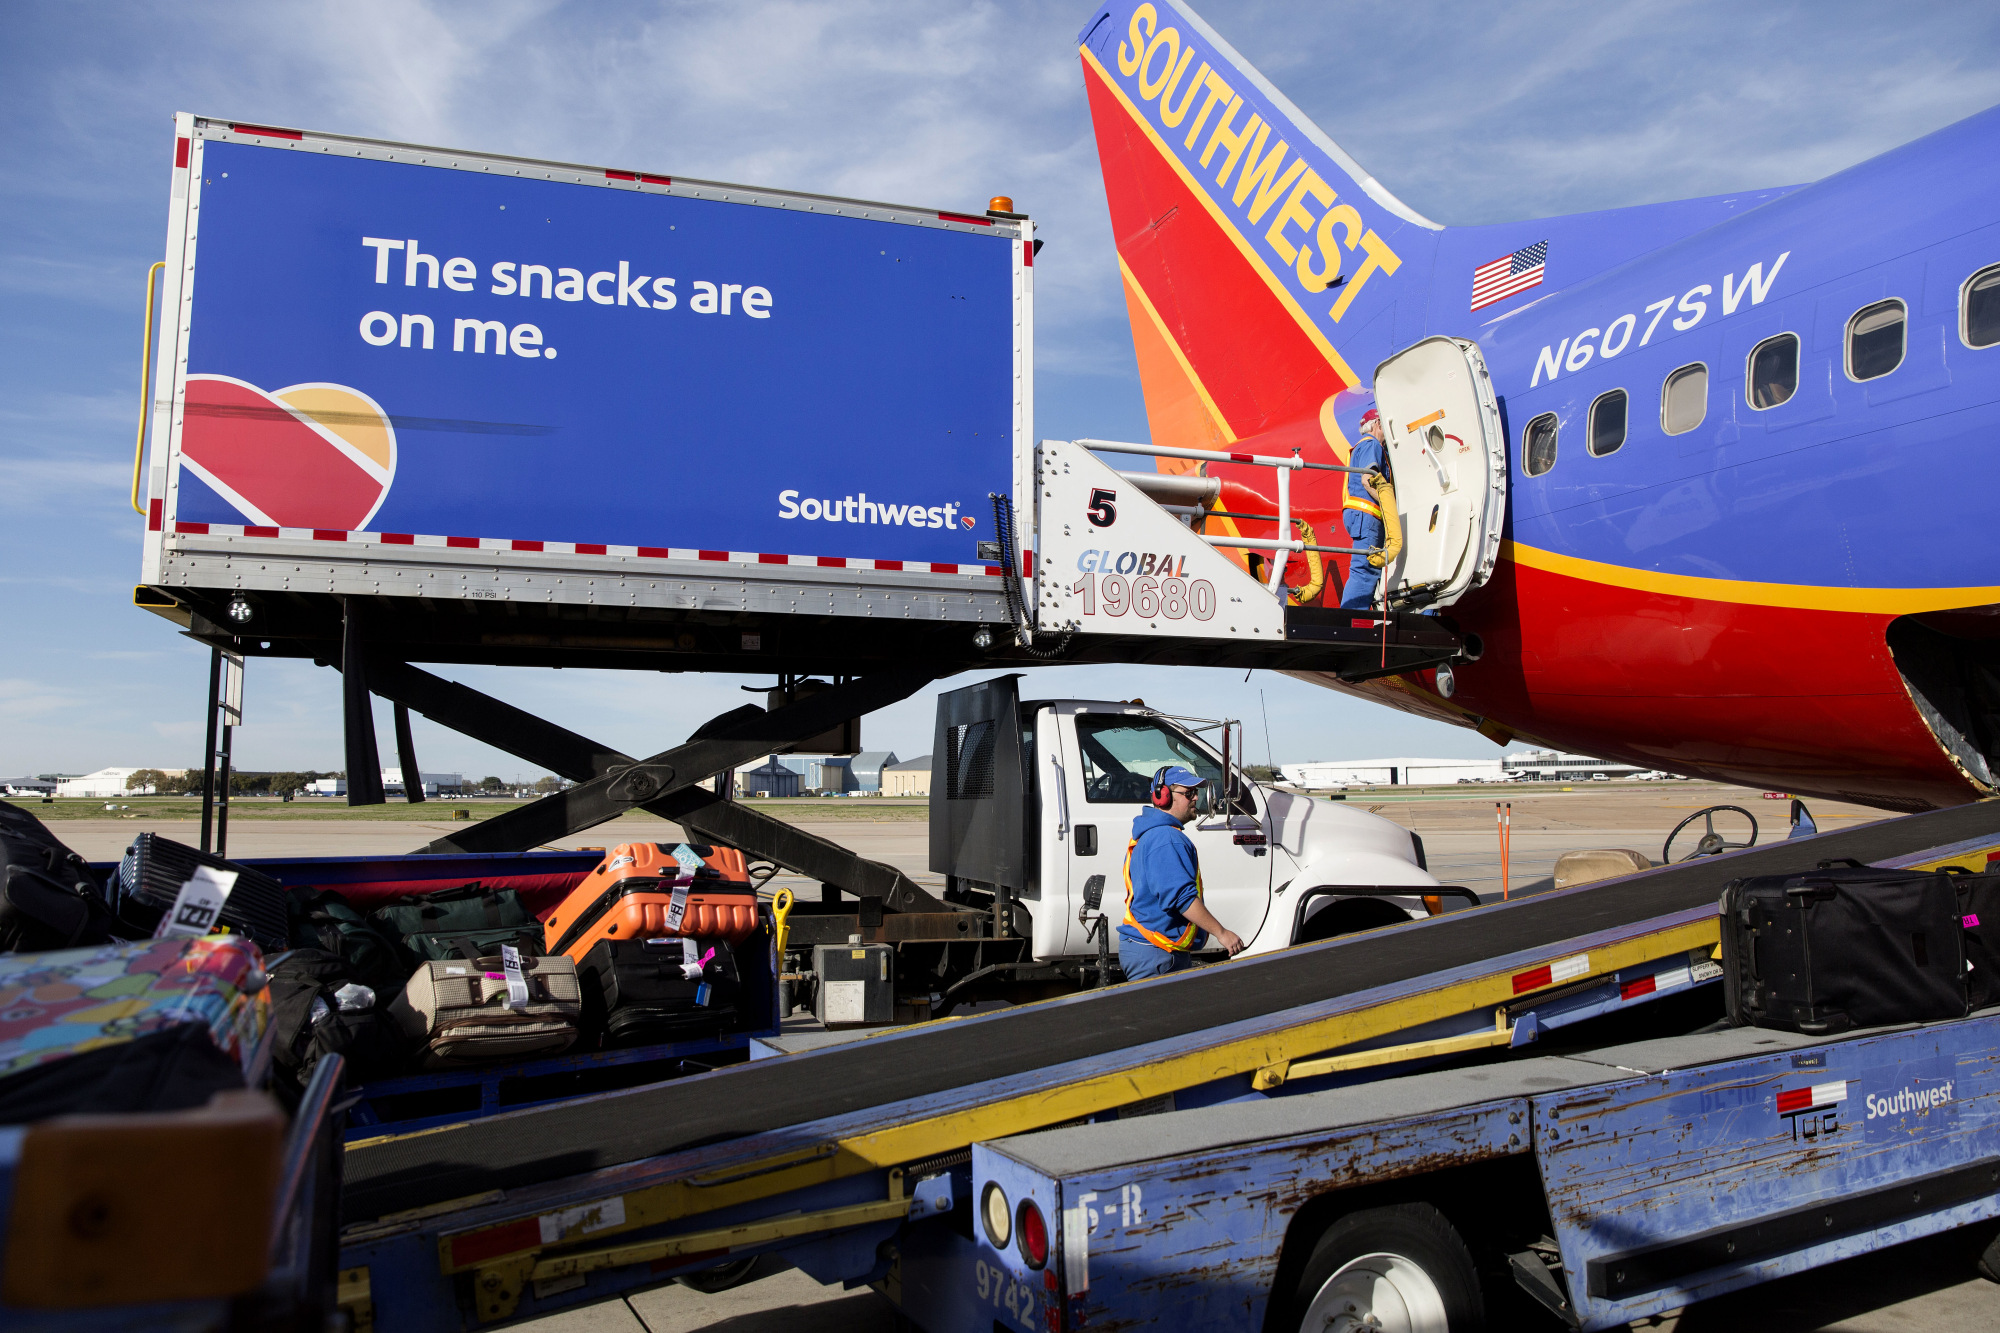 Southwest (LUV) Limits Onboard Drinks to Water on Long Flights Bloomberg